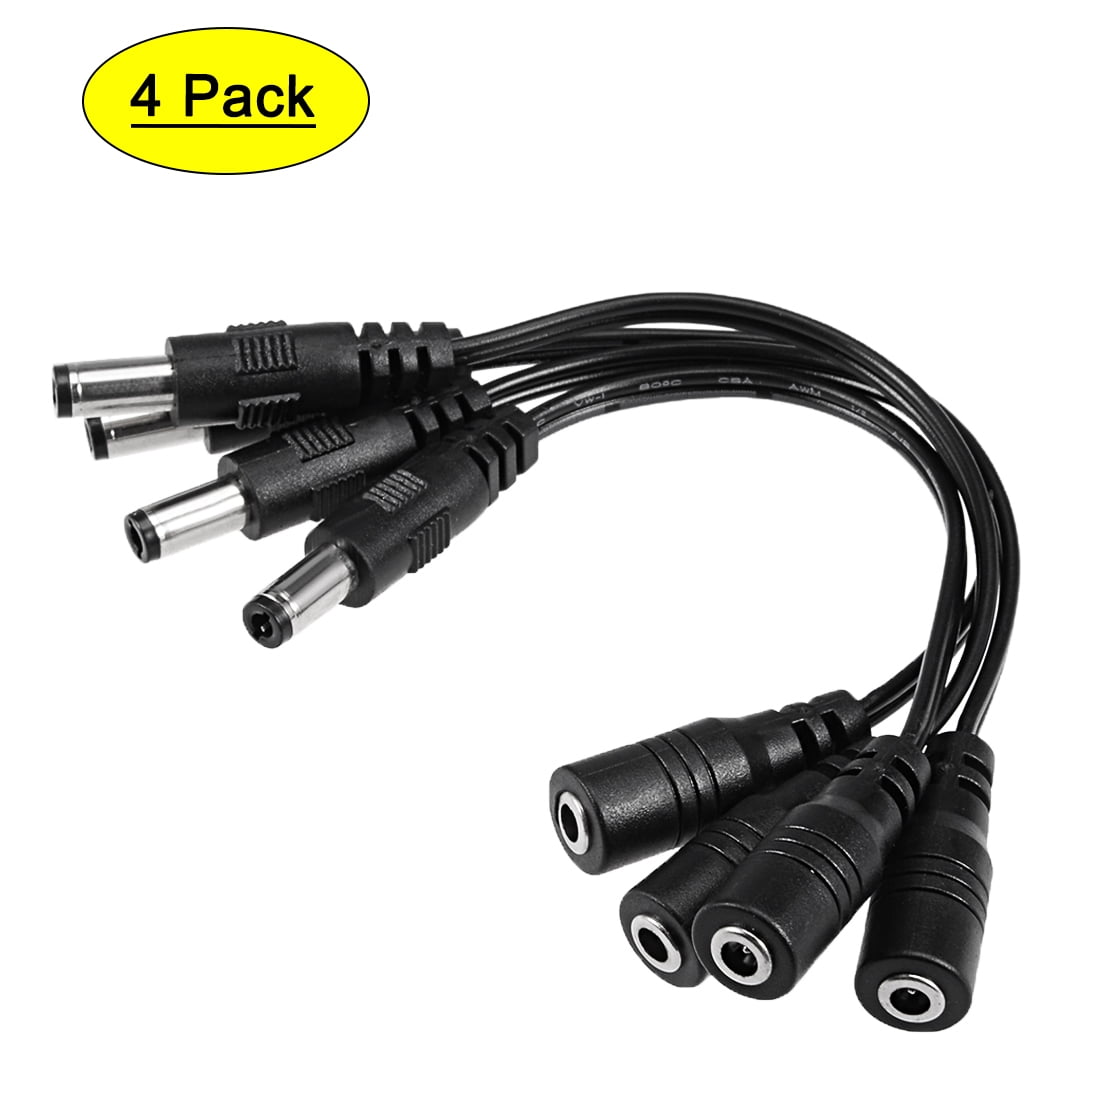 5.5x2.1mm Male Splitter CCTV Arduino Y Power Cable R45 5.5x2.1mm Female to 2 